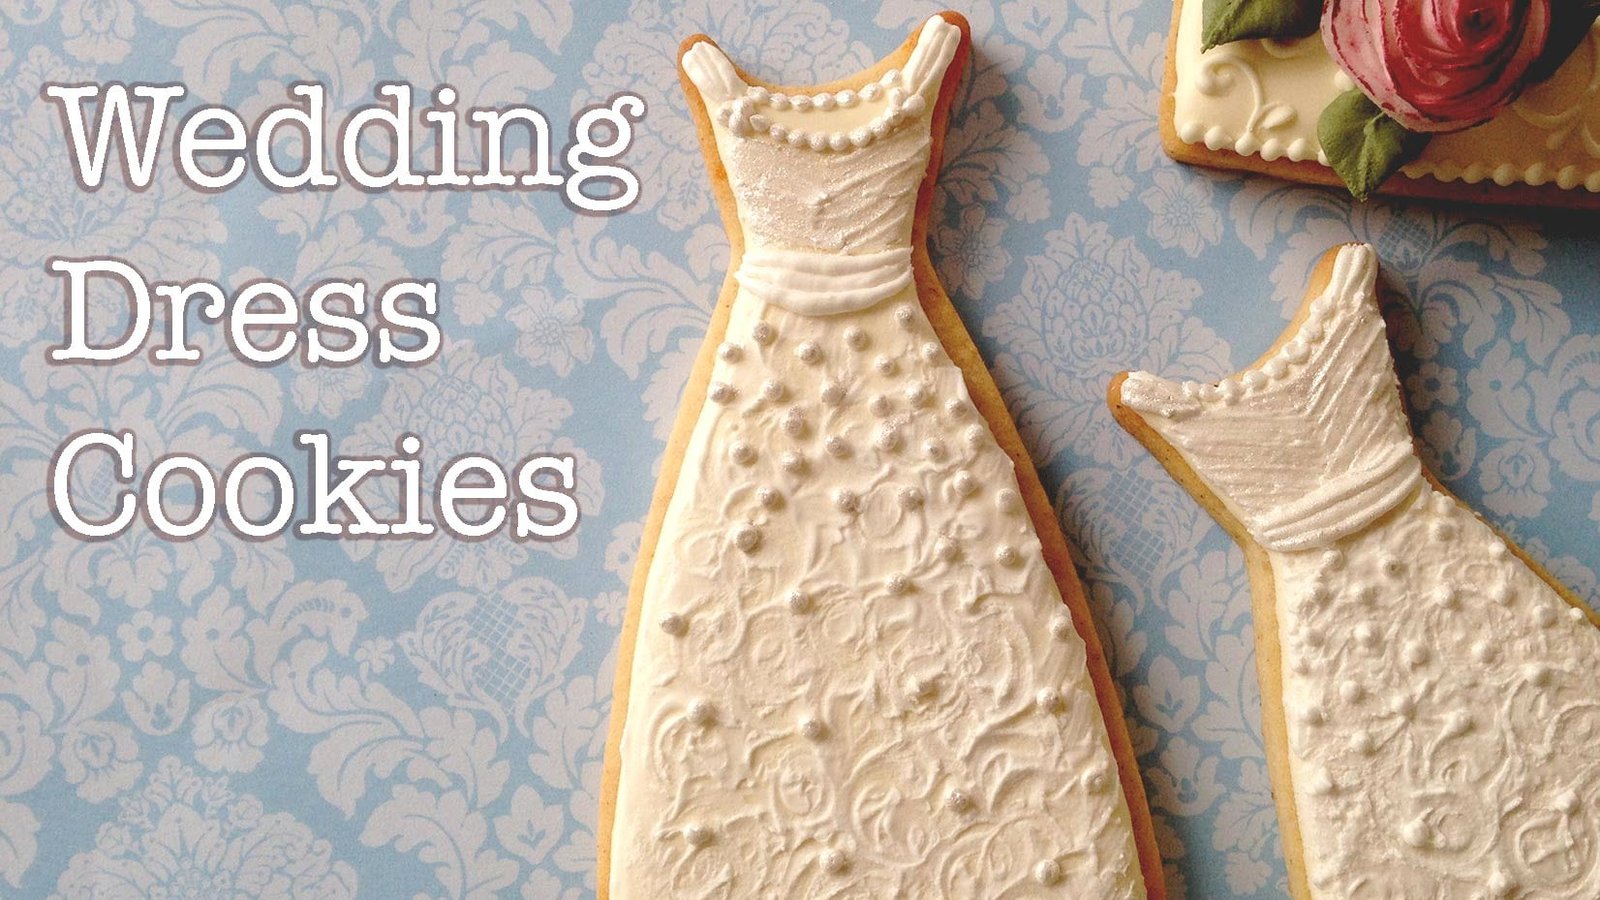 How To Decorate Wedding Dress Cookies!